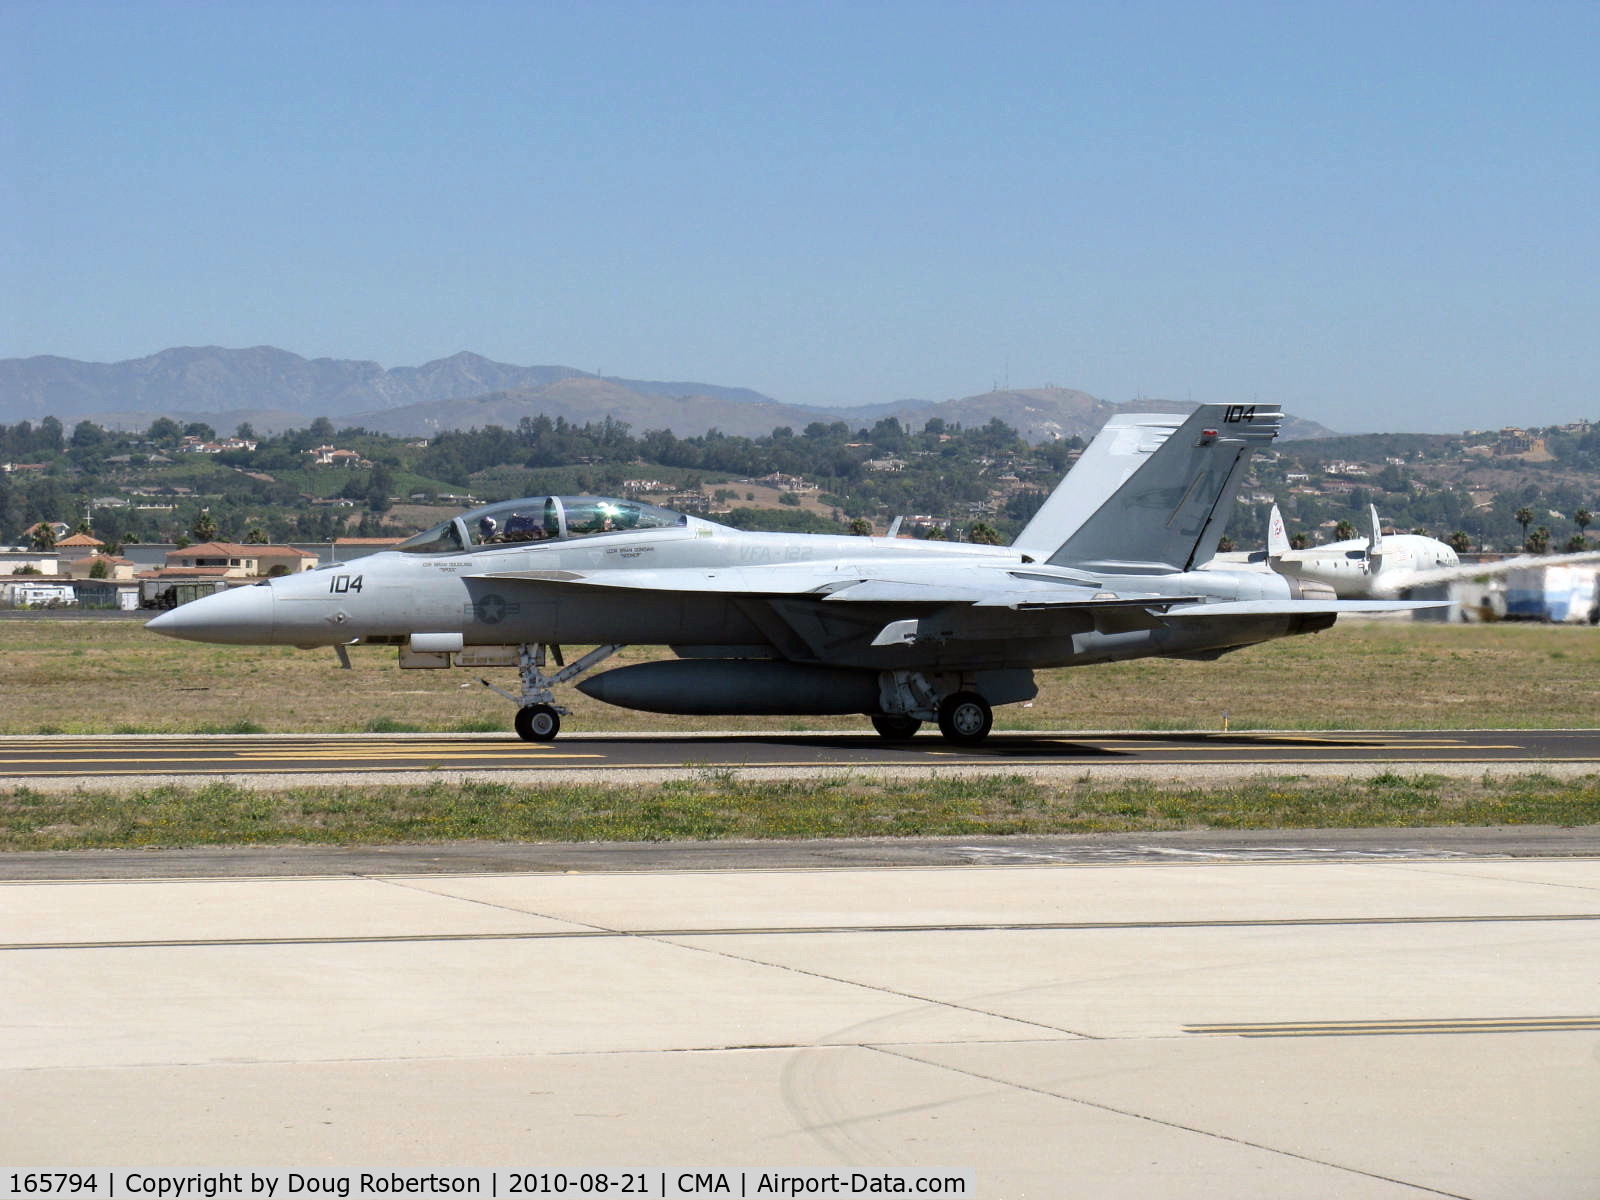 165794, Boeing F/A-18F Super Hornet C/N 1521/F020, Boeing F/A-18F SUPER HORNET, two General Electric F414-GE-400 Turbofans, 14,000 lbf each, 22,000 lbf each with afterburners, taxi to Rwy 26